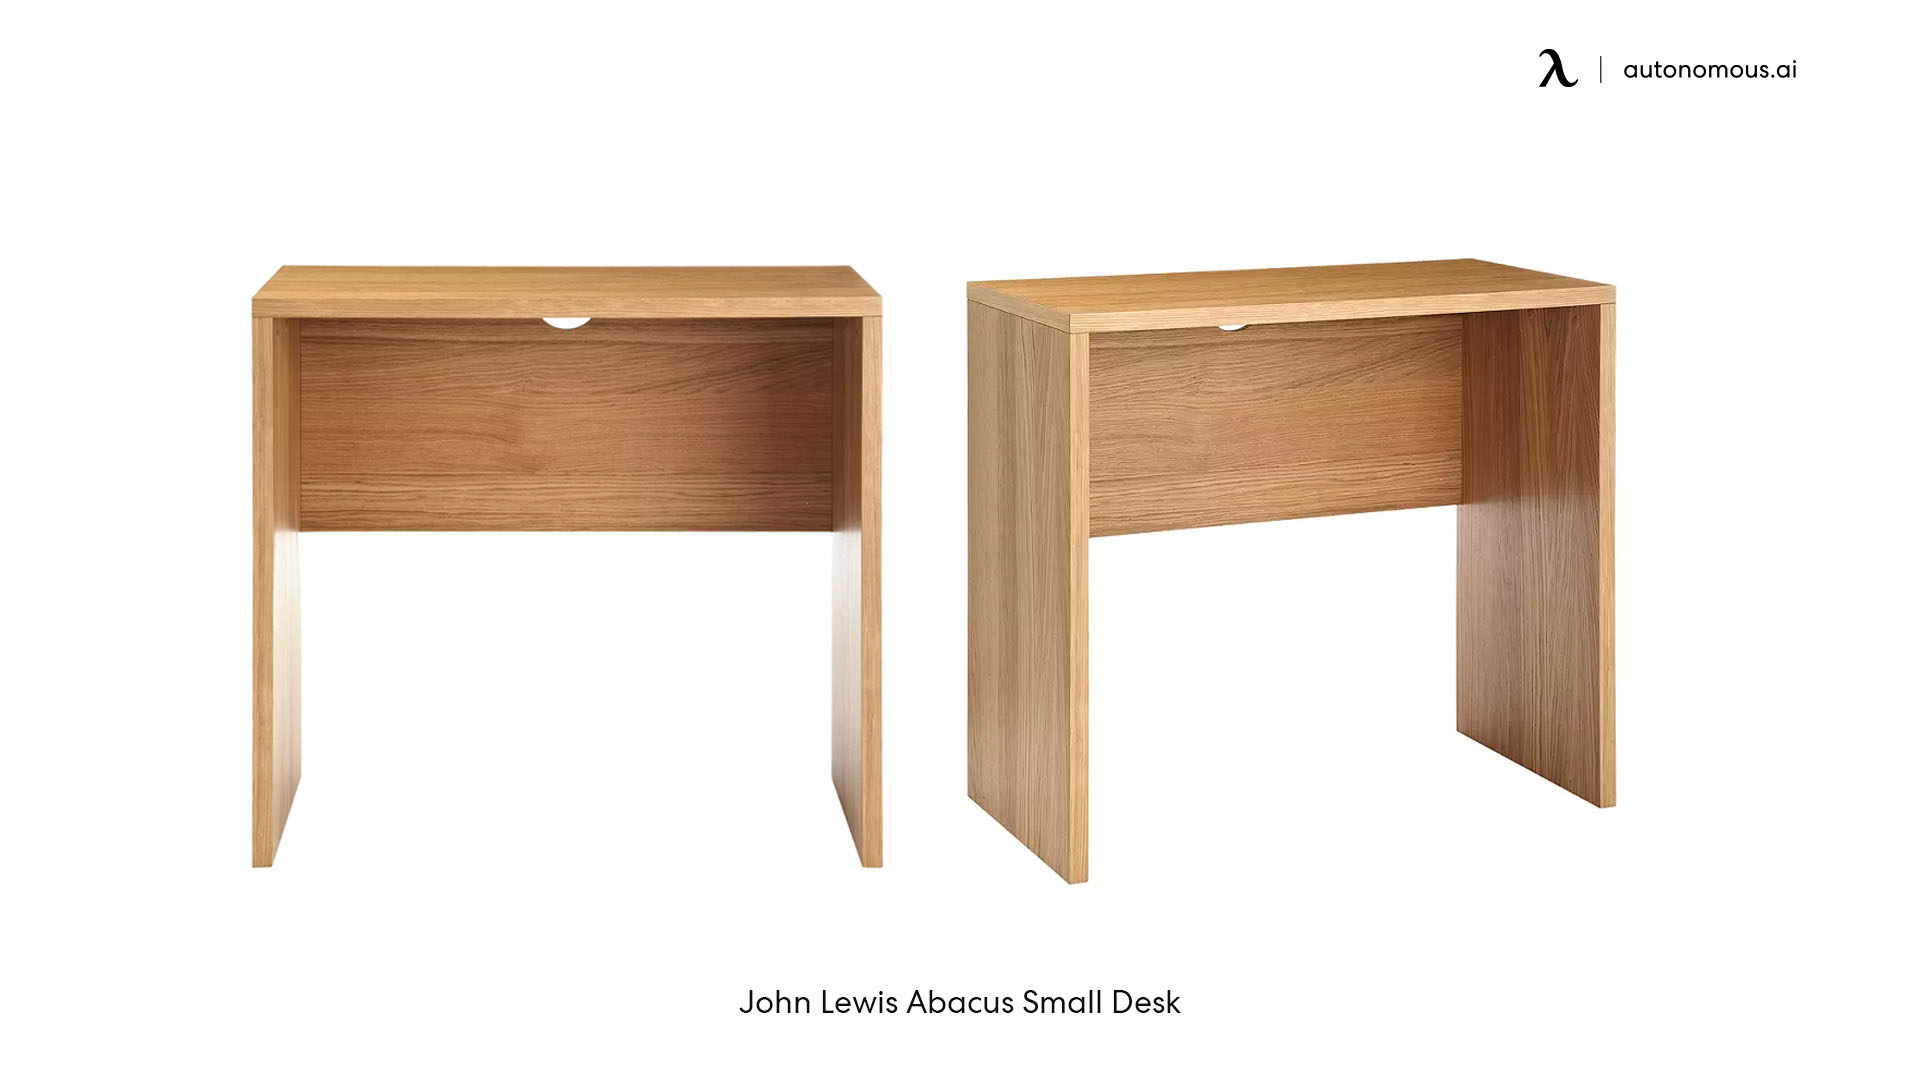 John Lewis Abacus Small Desk